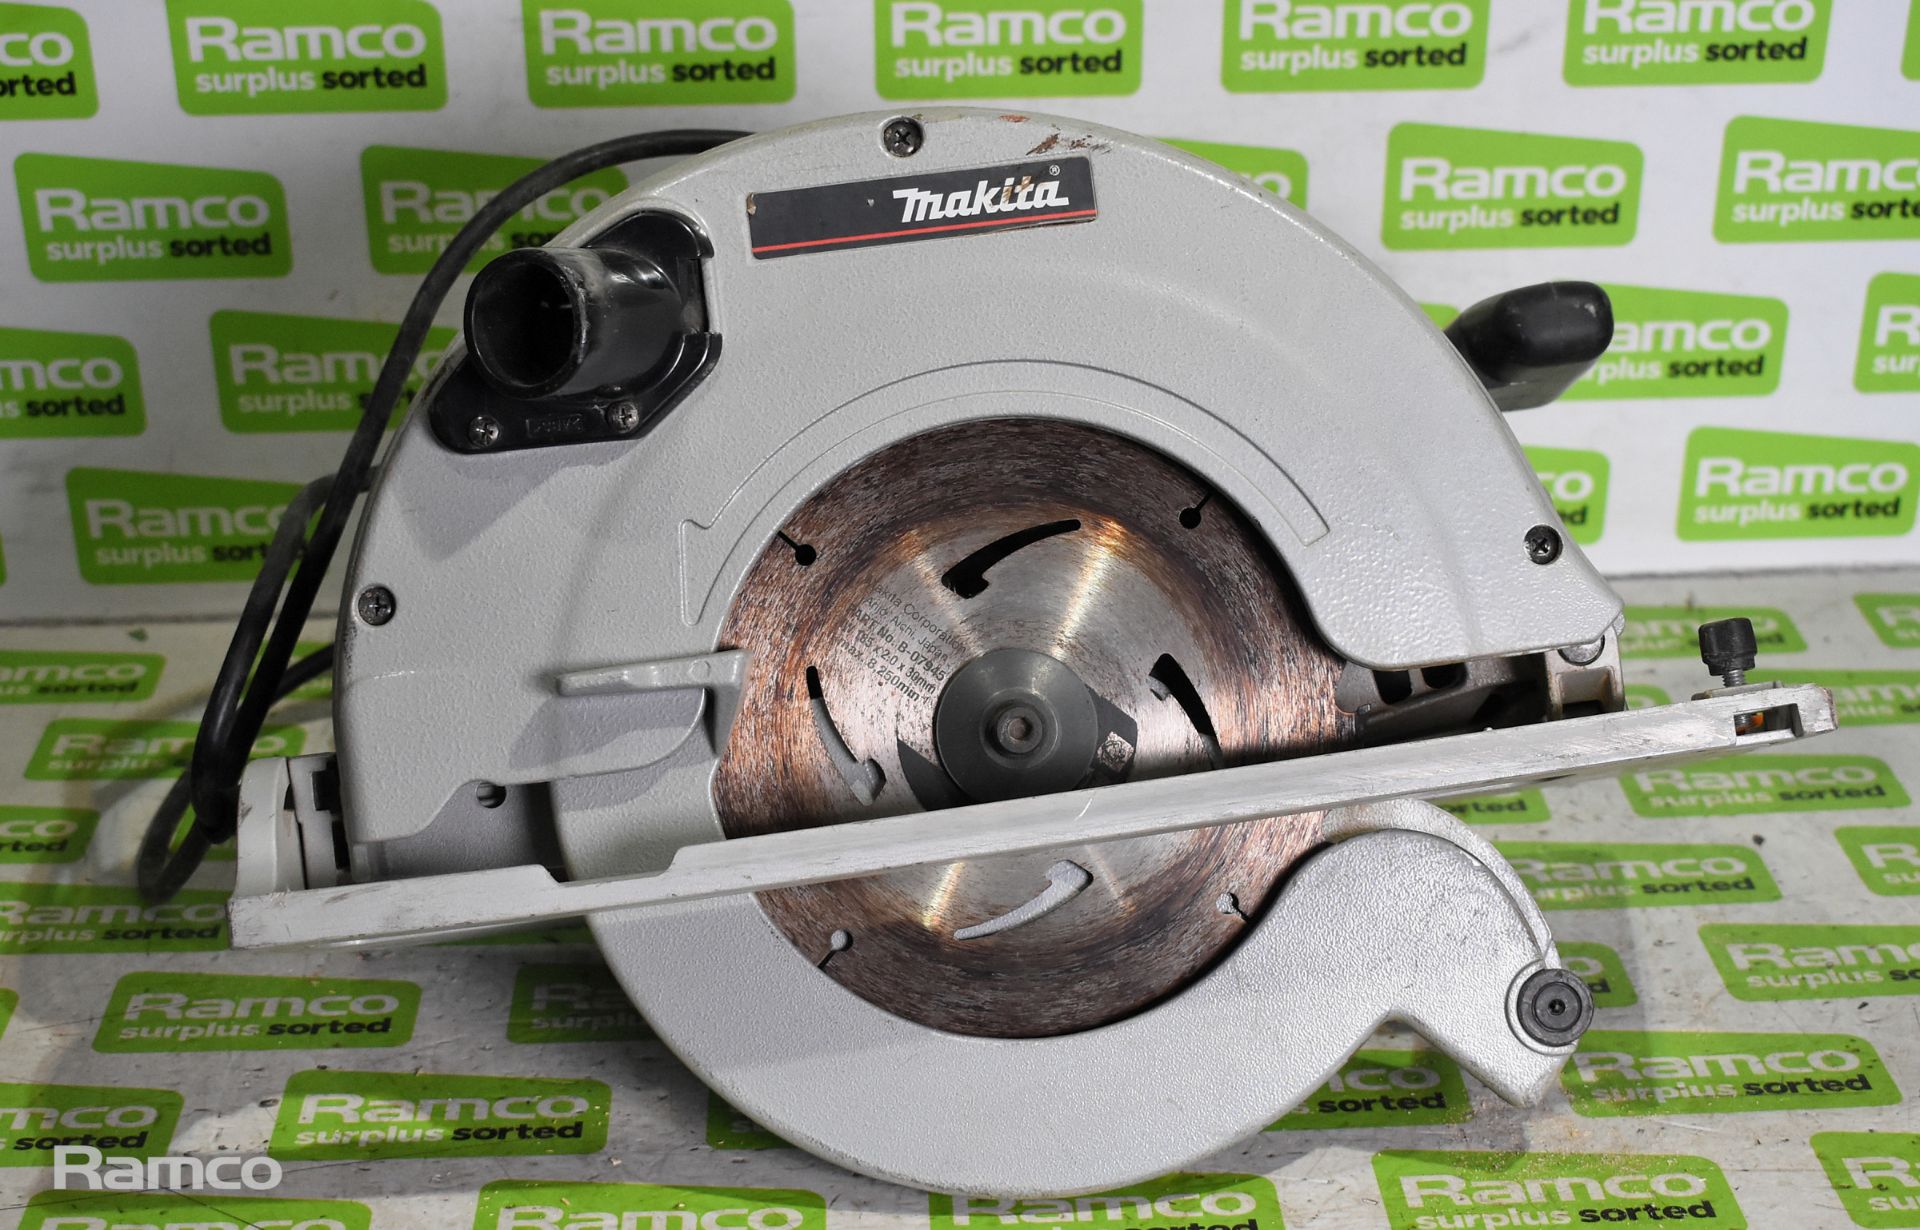 Makita 5903R 110V circular saw 1550W - 235mm blade with case - Image 2 of 10